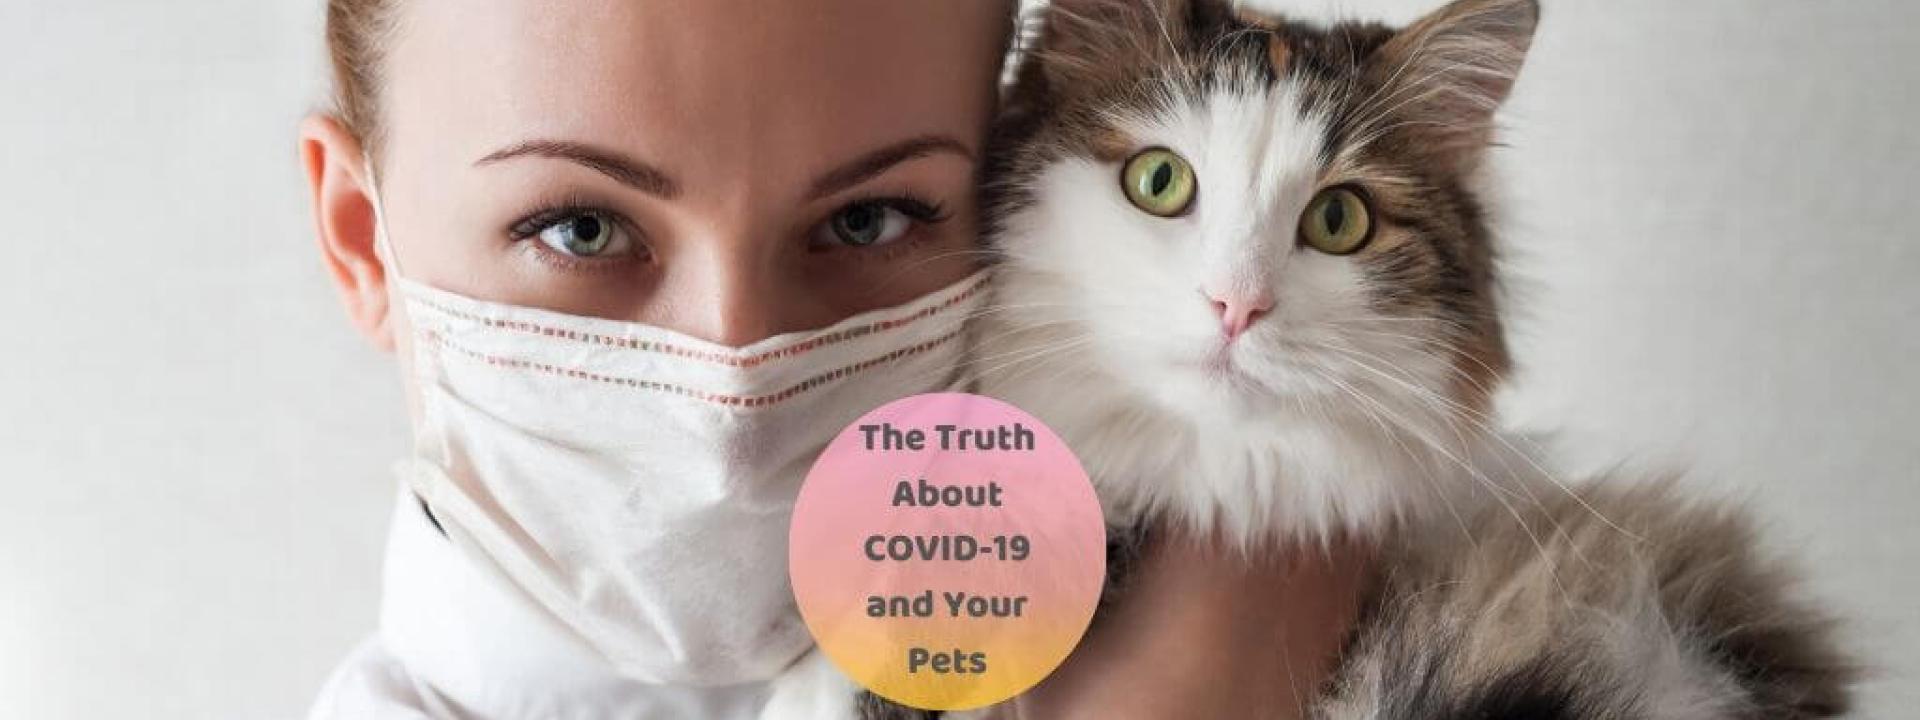 the truth about COVID-19 and your pets